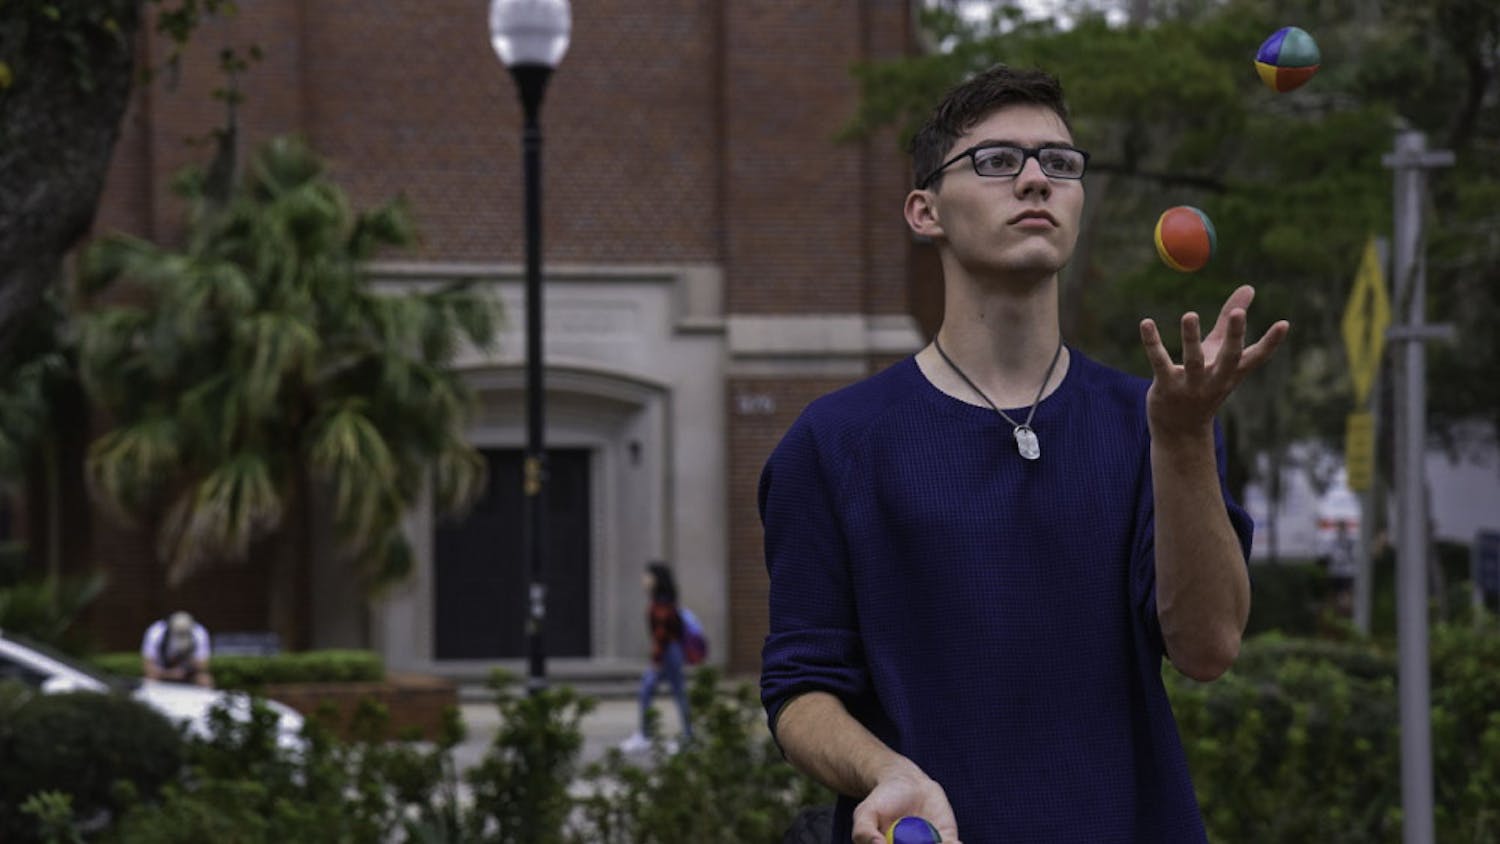 Ethan Irvin, a 19-year-old UF mathematics sophomore, juggles on Turlington Plaza on Feb. 12. Irvin said he's been juggling for more than two years and loves doing it. "It's a good stress reliever,” he said.